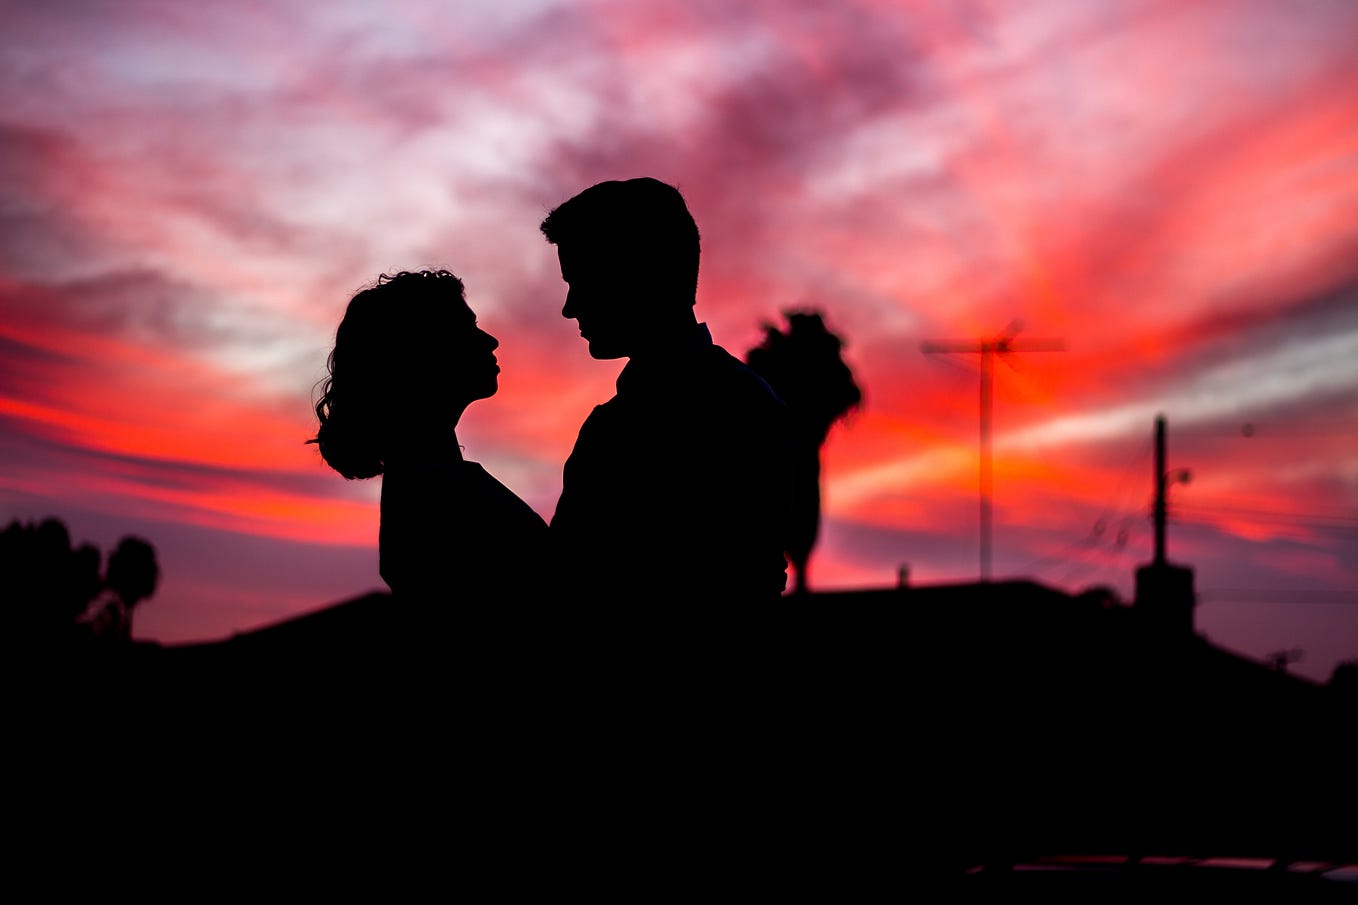 A man and a woman stand facing each other in front of a sunset.